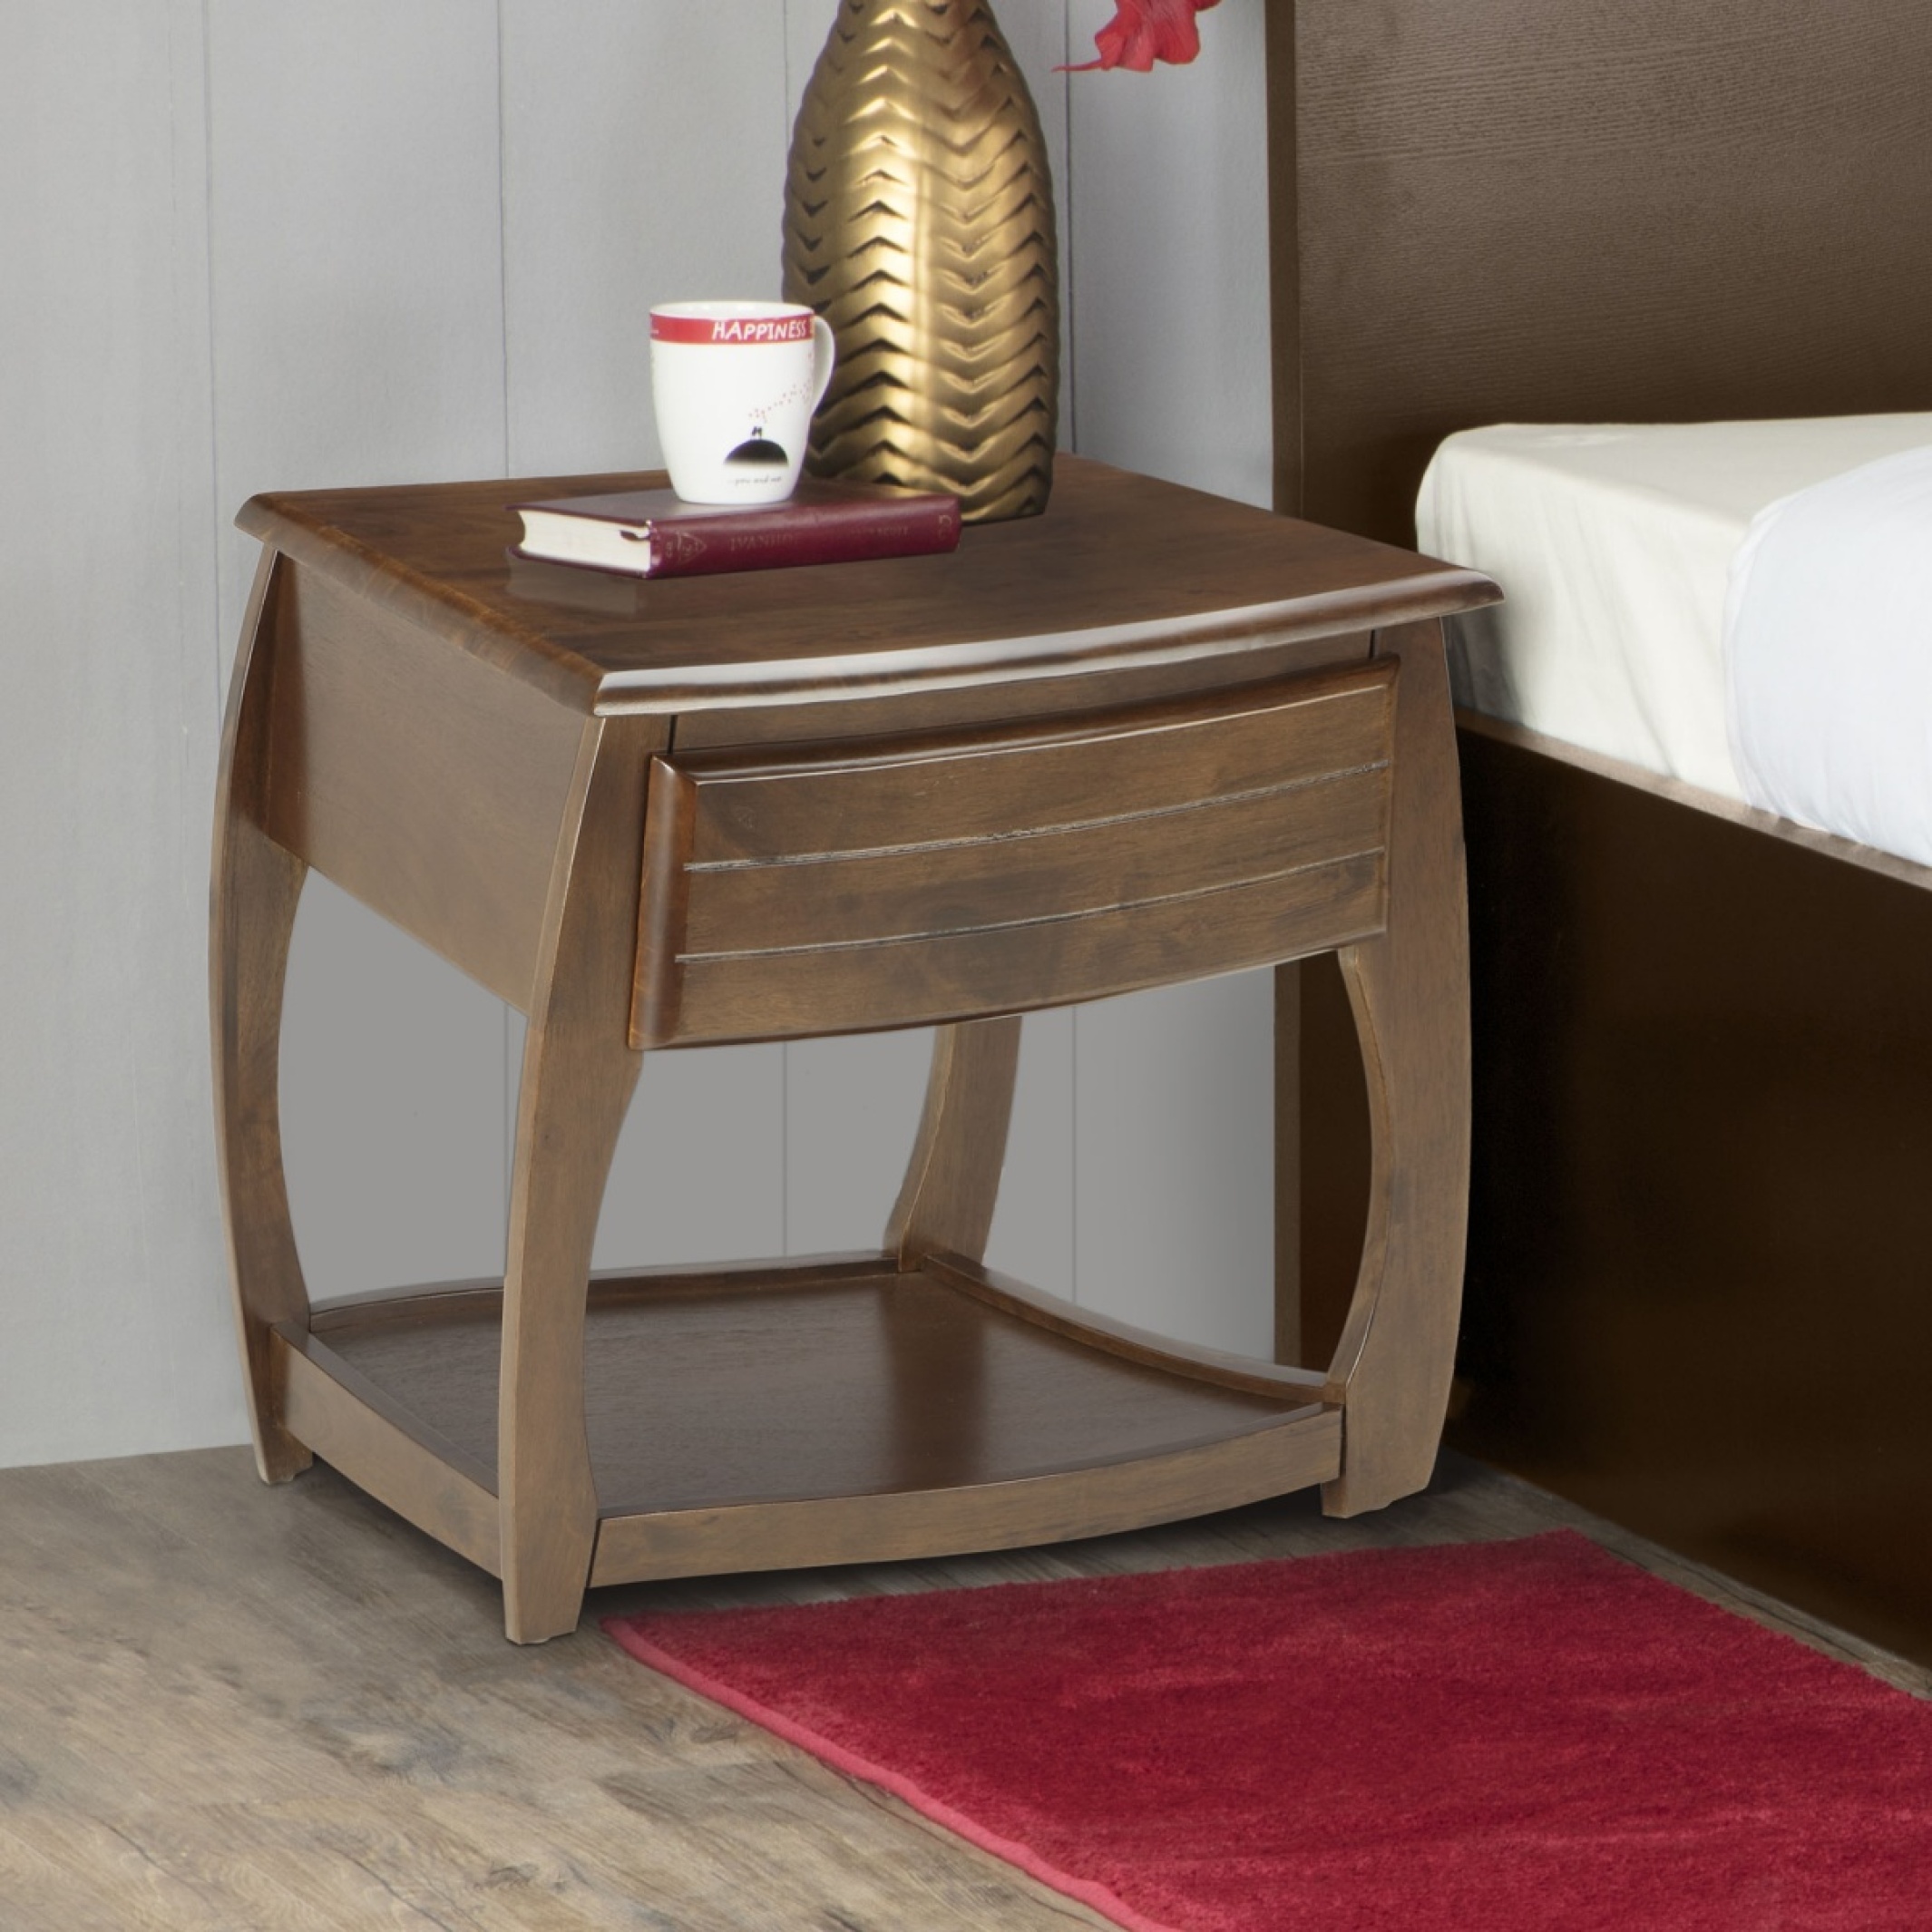 Fern Rubber Wood Bed Side Table - Brown